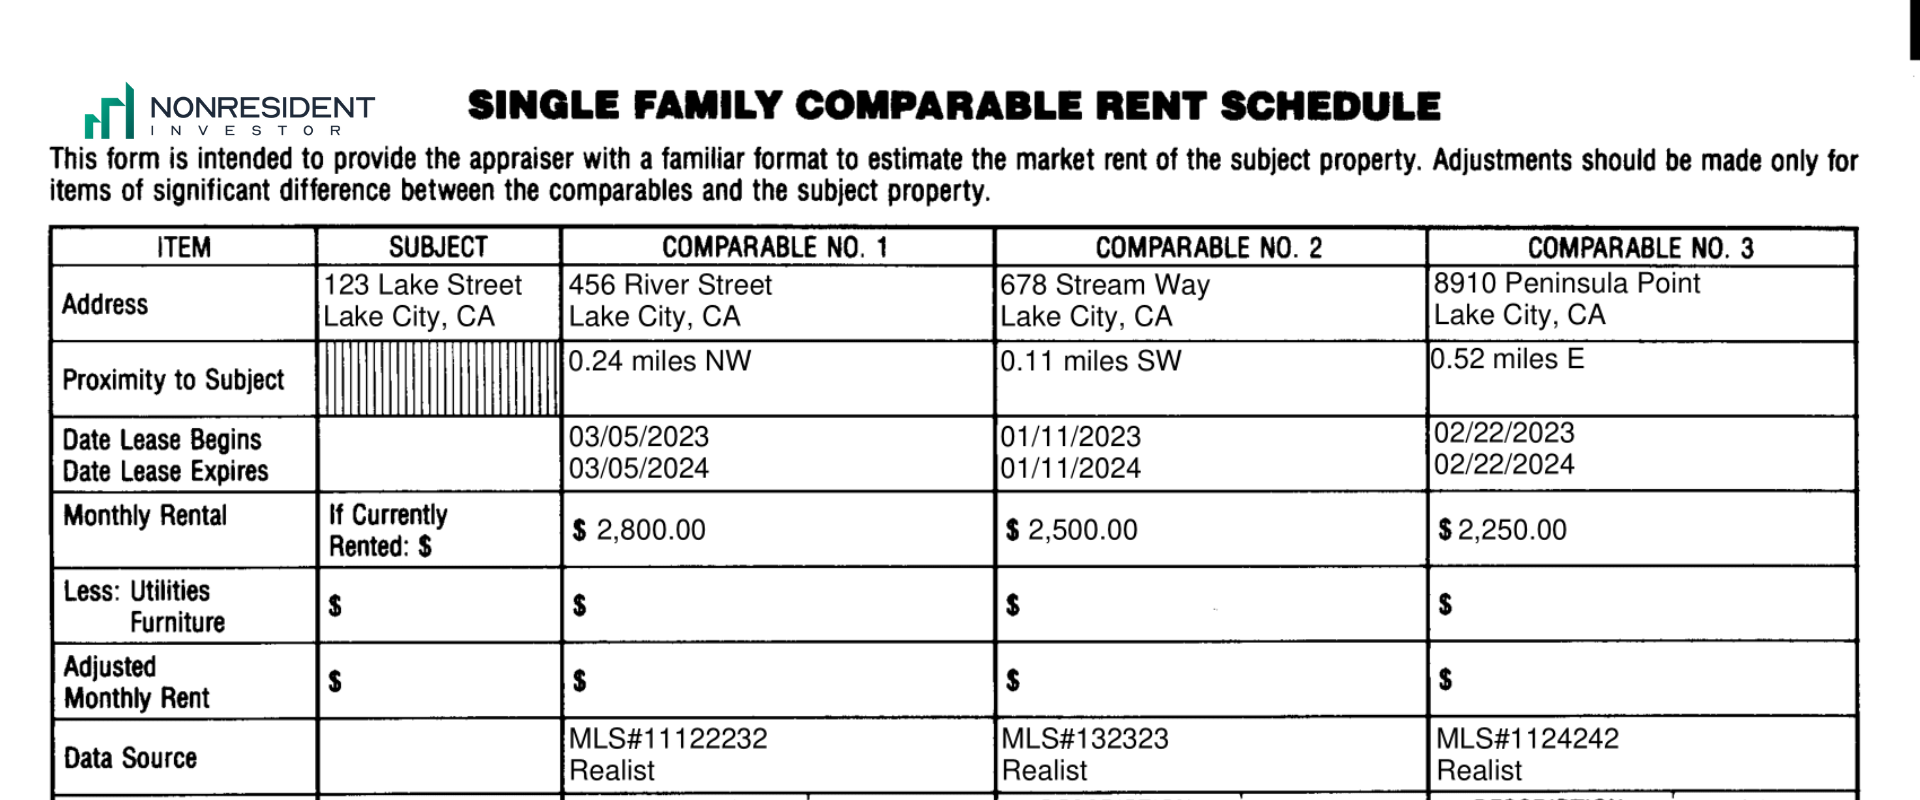 1007 form and rent schedule example